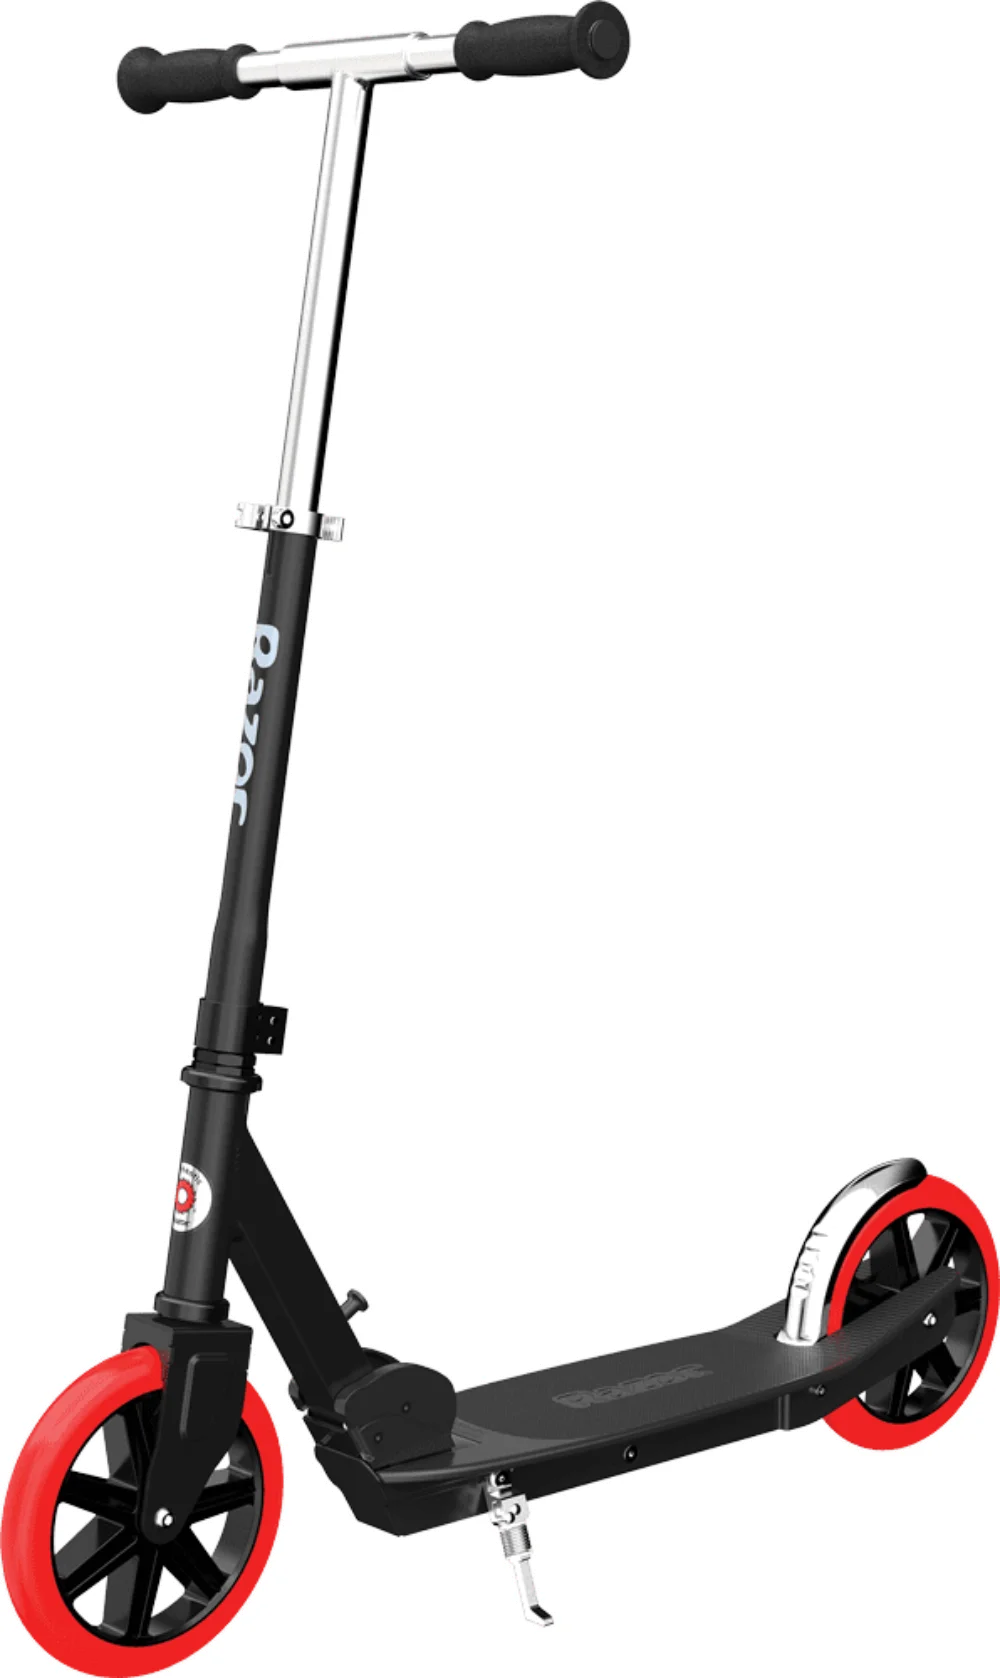 Lux Kick Scooter - Black/Red, Spoked Large Wheels, Folding Scooter for Ages 8+ and Up To 220 Lbs  Adult Scooter